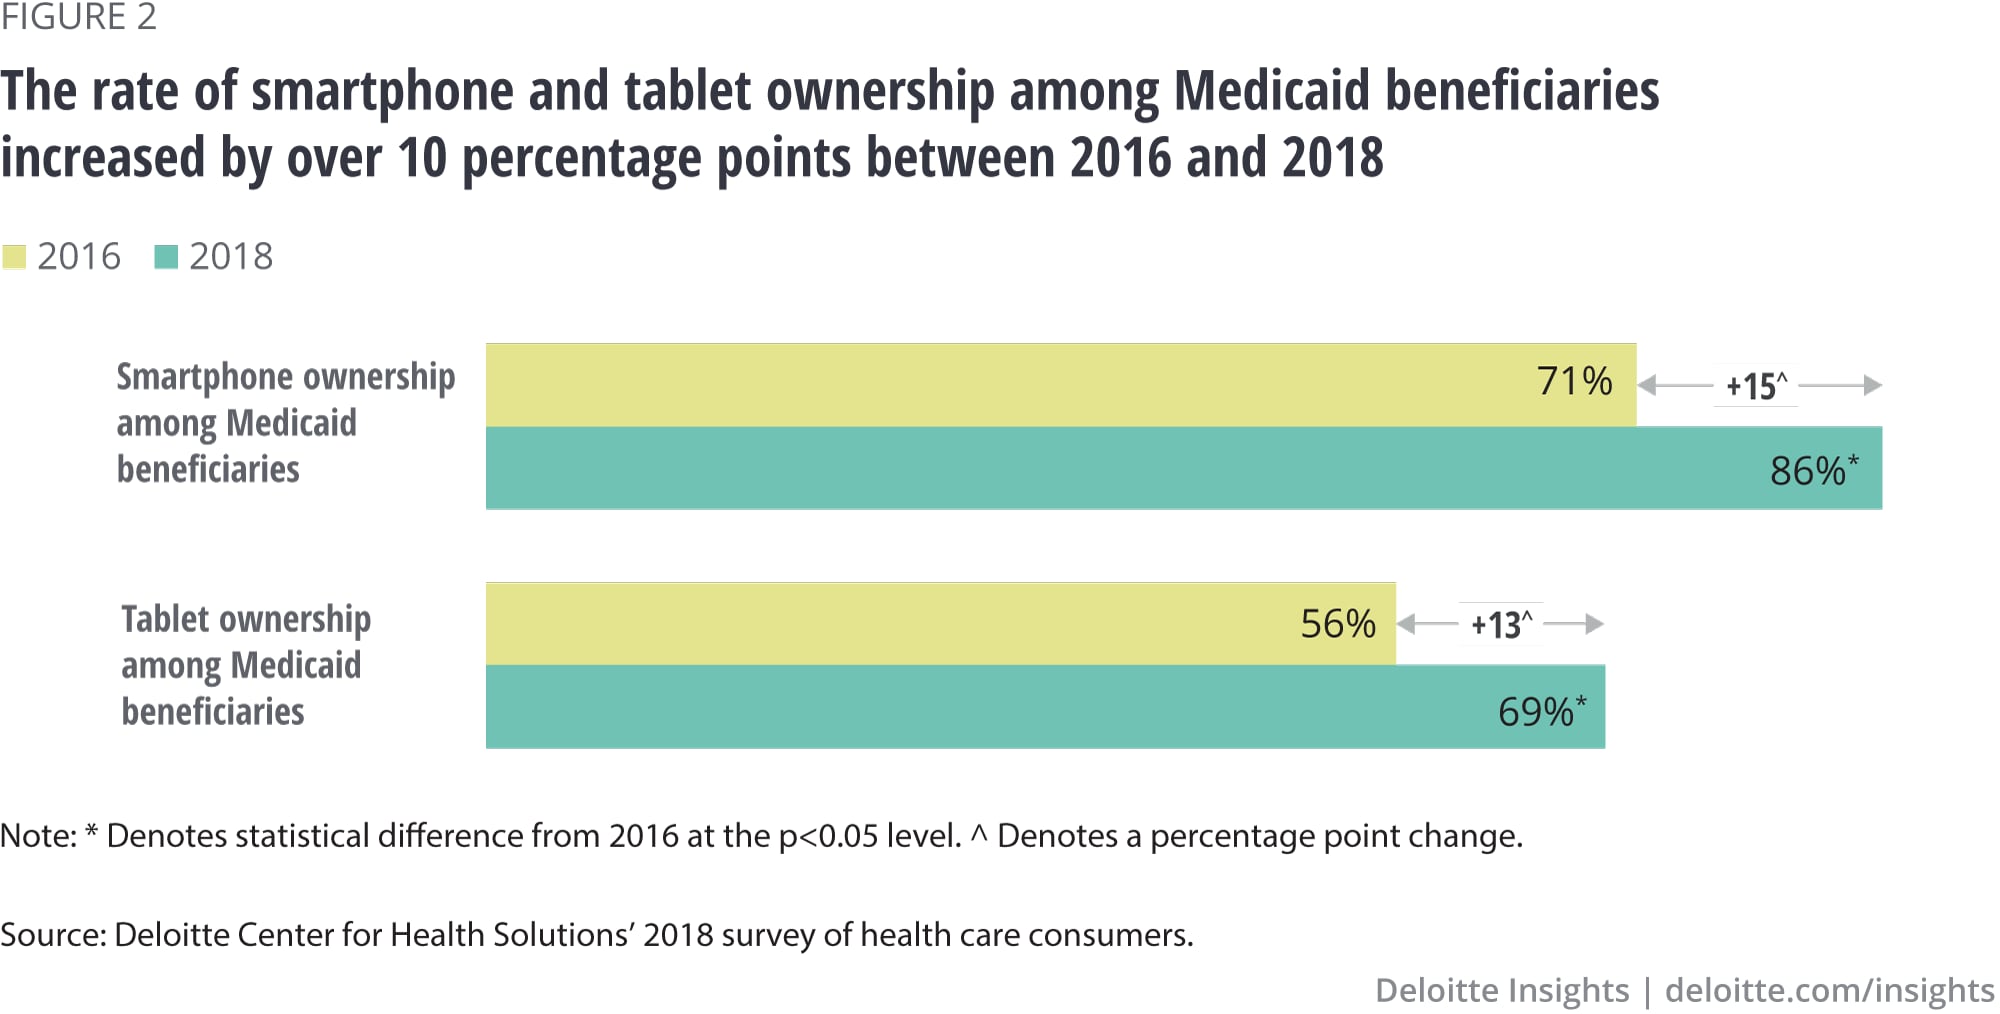 The rate of smartphone and tablet ownership among Medicaid beneficiaries increased by over 10 percentage points between 2016 and 2018